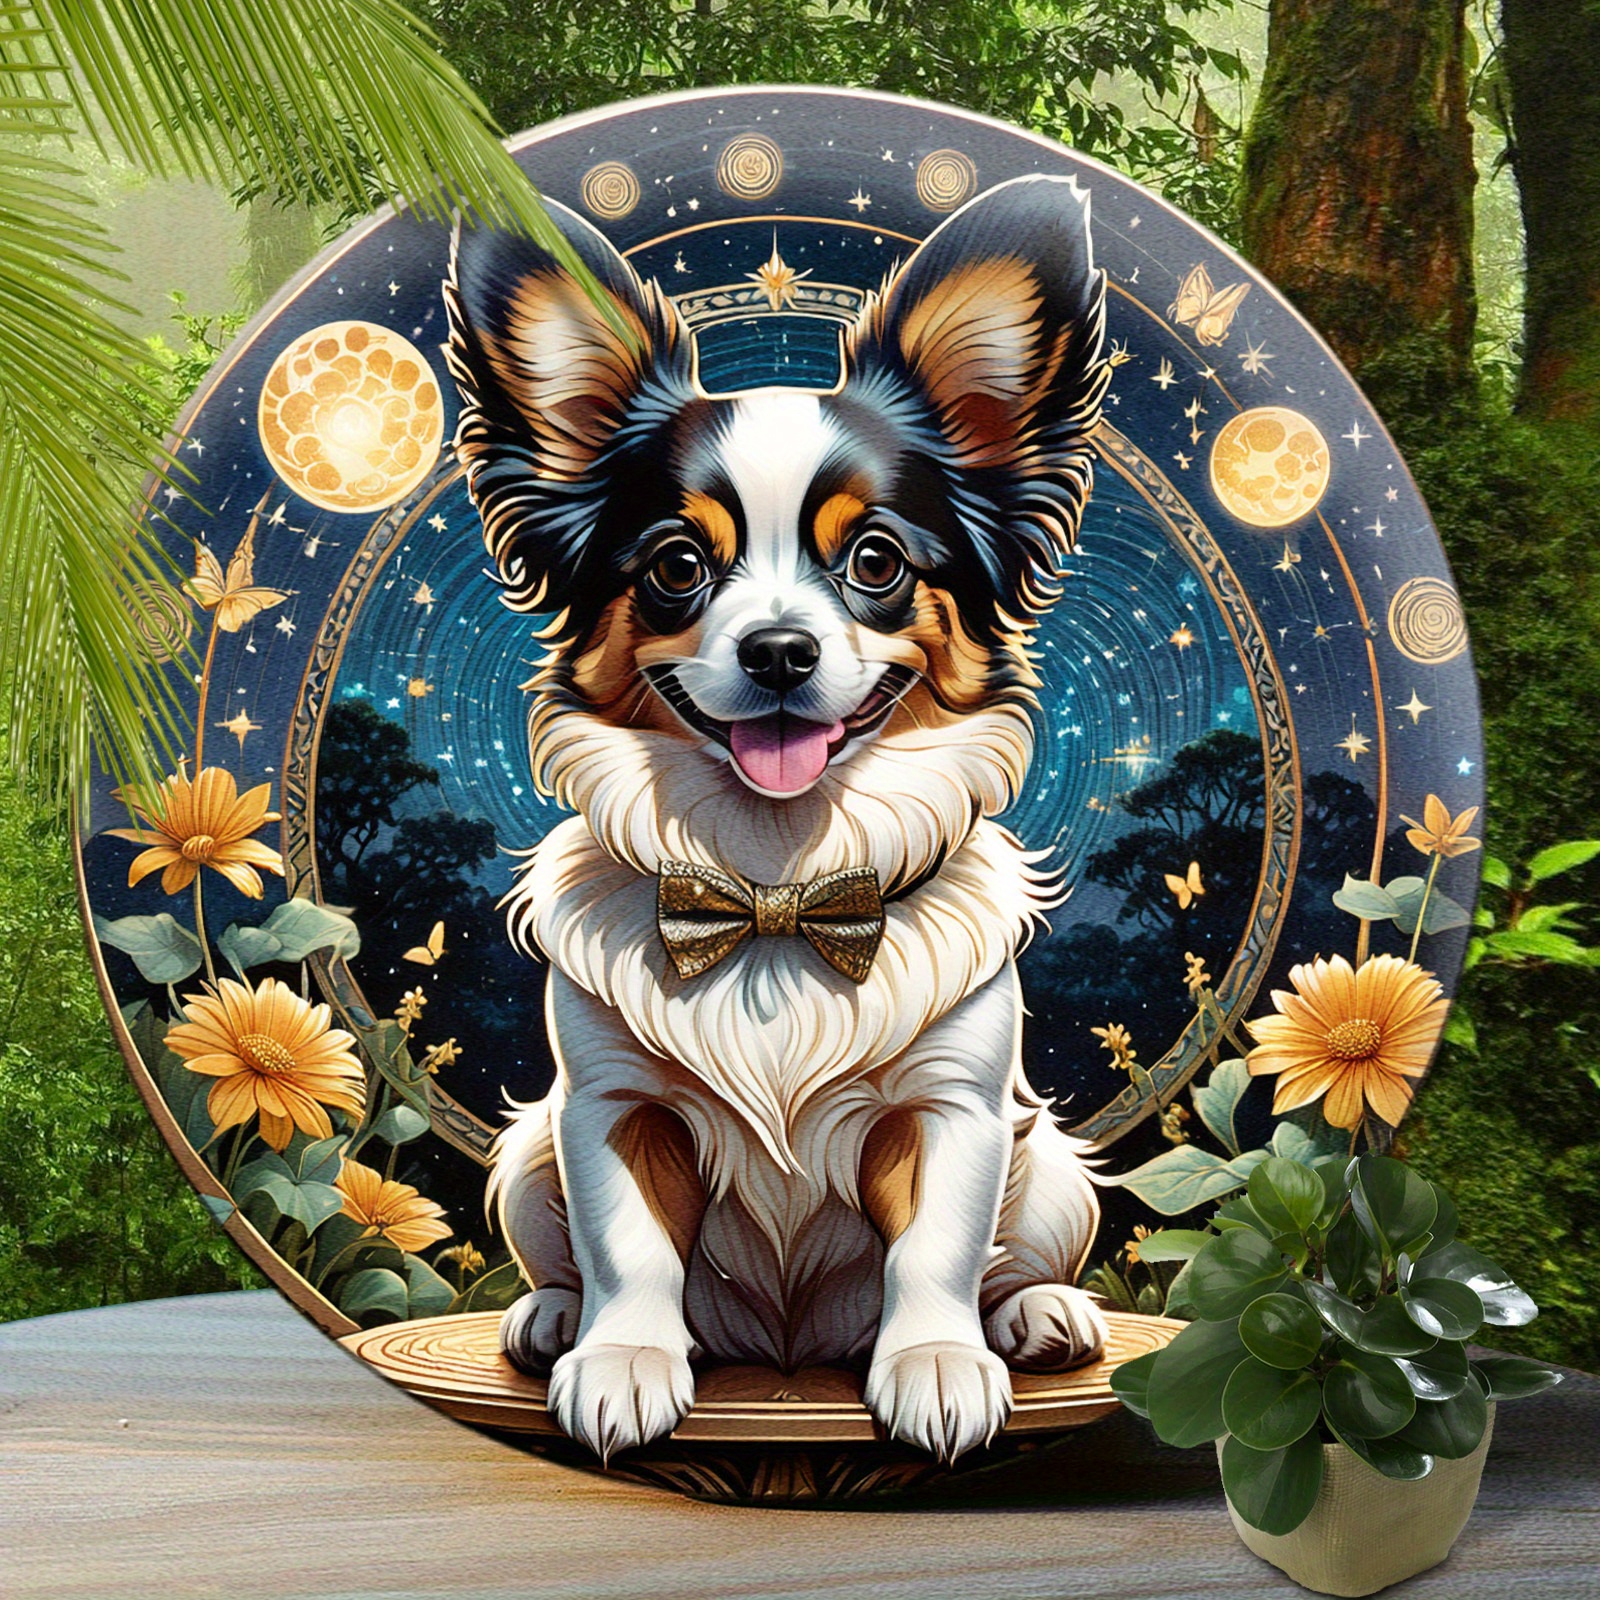 

1pc, Papillon Dog Sign - Cute Dog Aluminum Sign, Suitable For Home Room Cafe Bedroom Bar Living Room Garage Wall Decoration, Round Fashion Art Aesthetic, Holiday Gift 8x8 Inch (20x20cm)